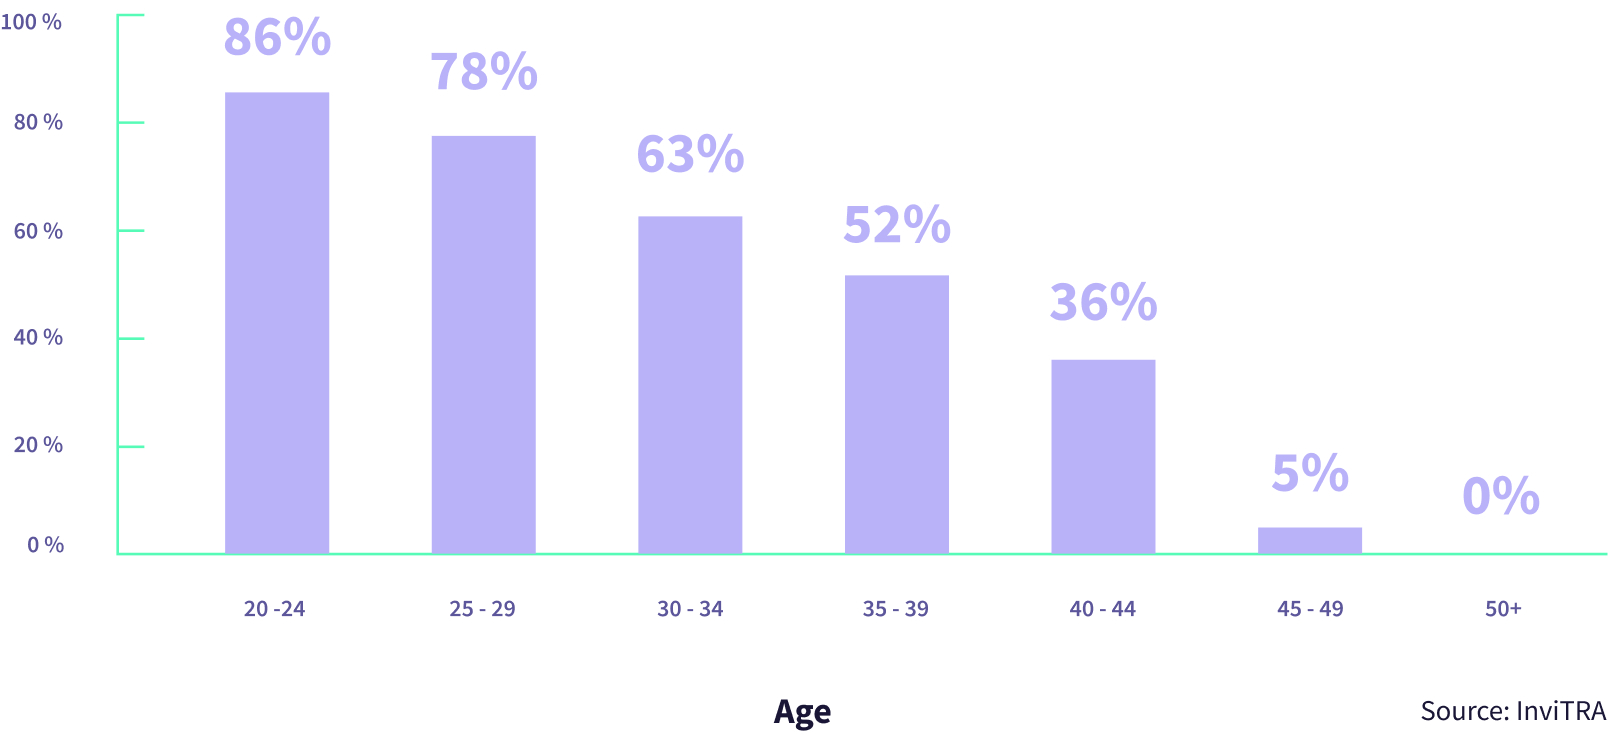 A bar chart showing the percentage of people who are over the age of 50.